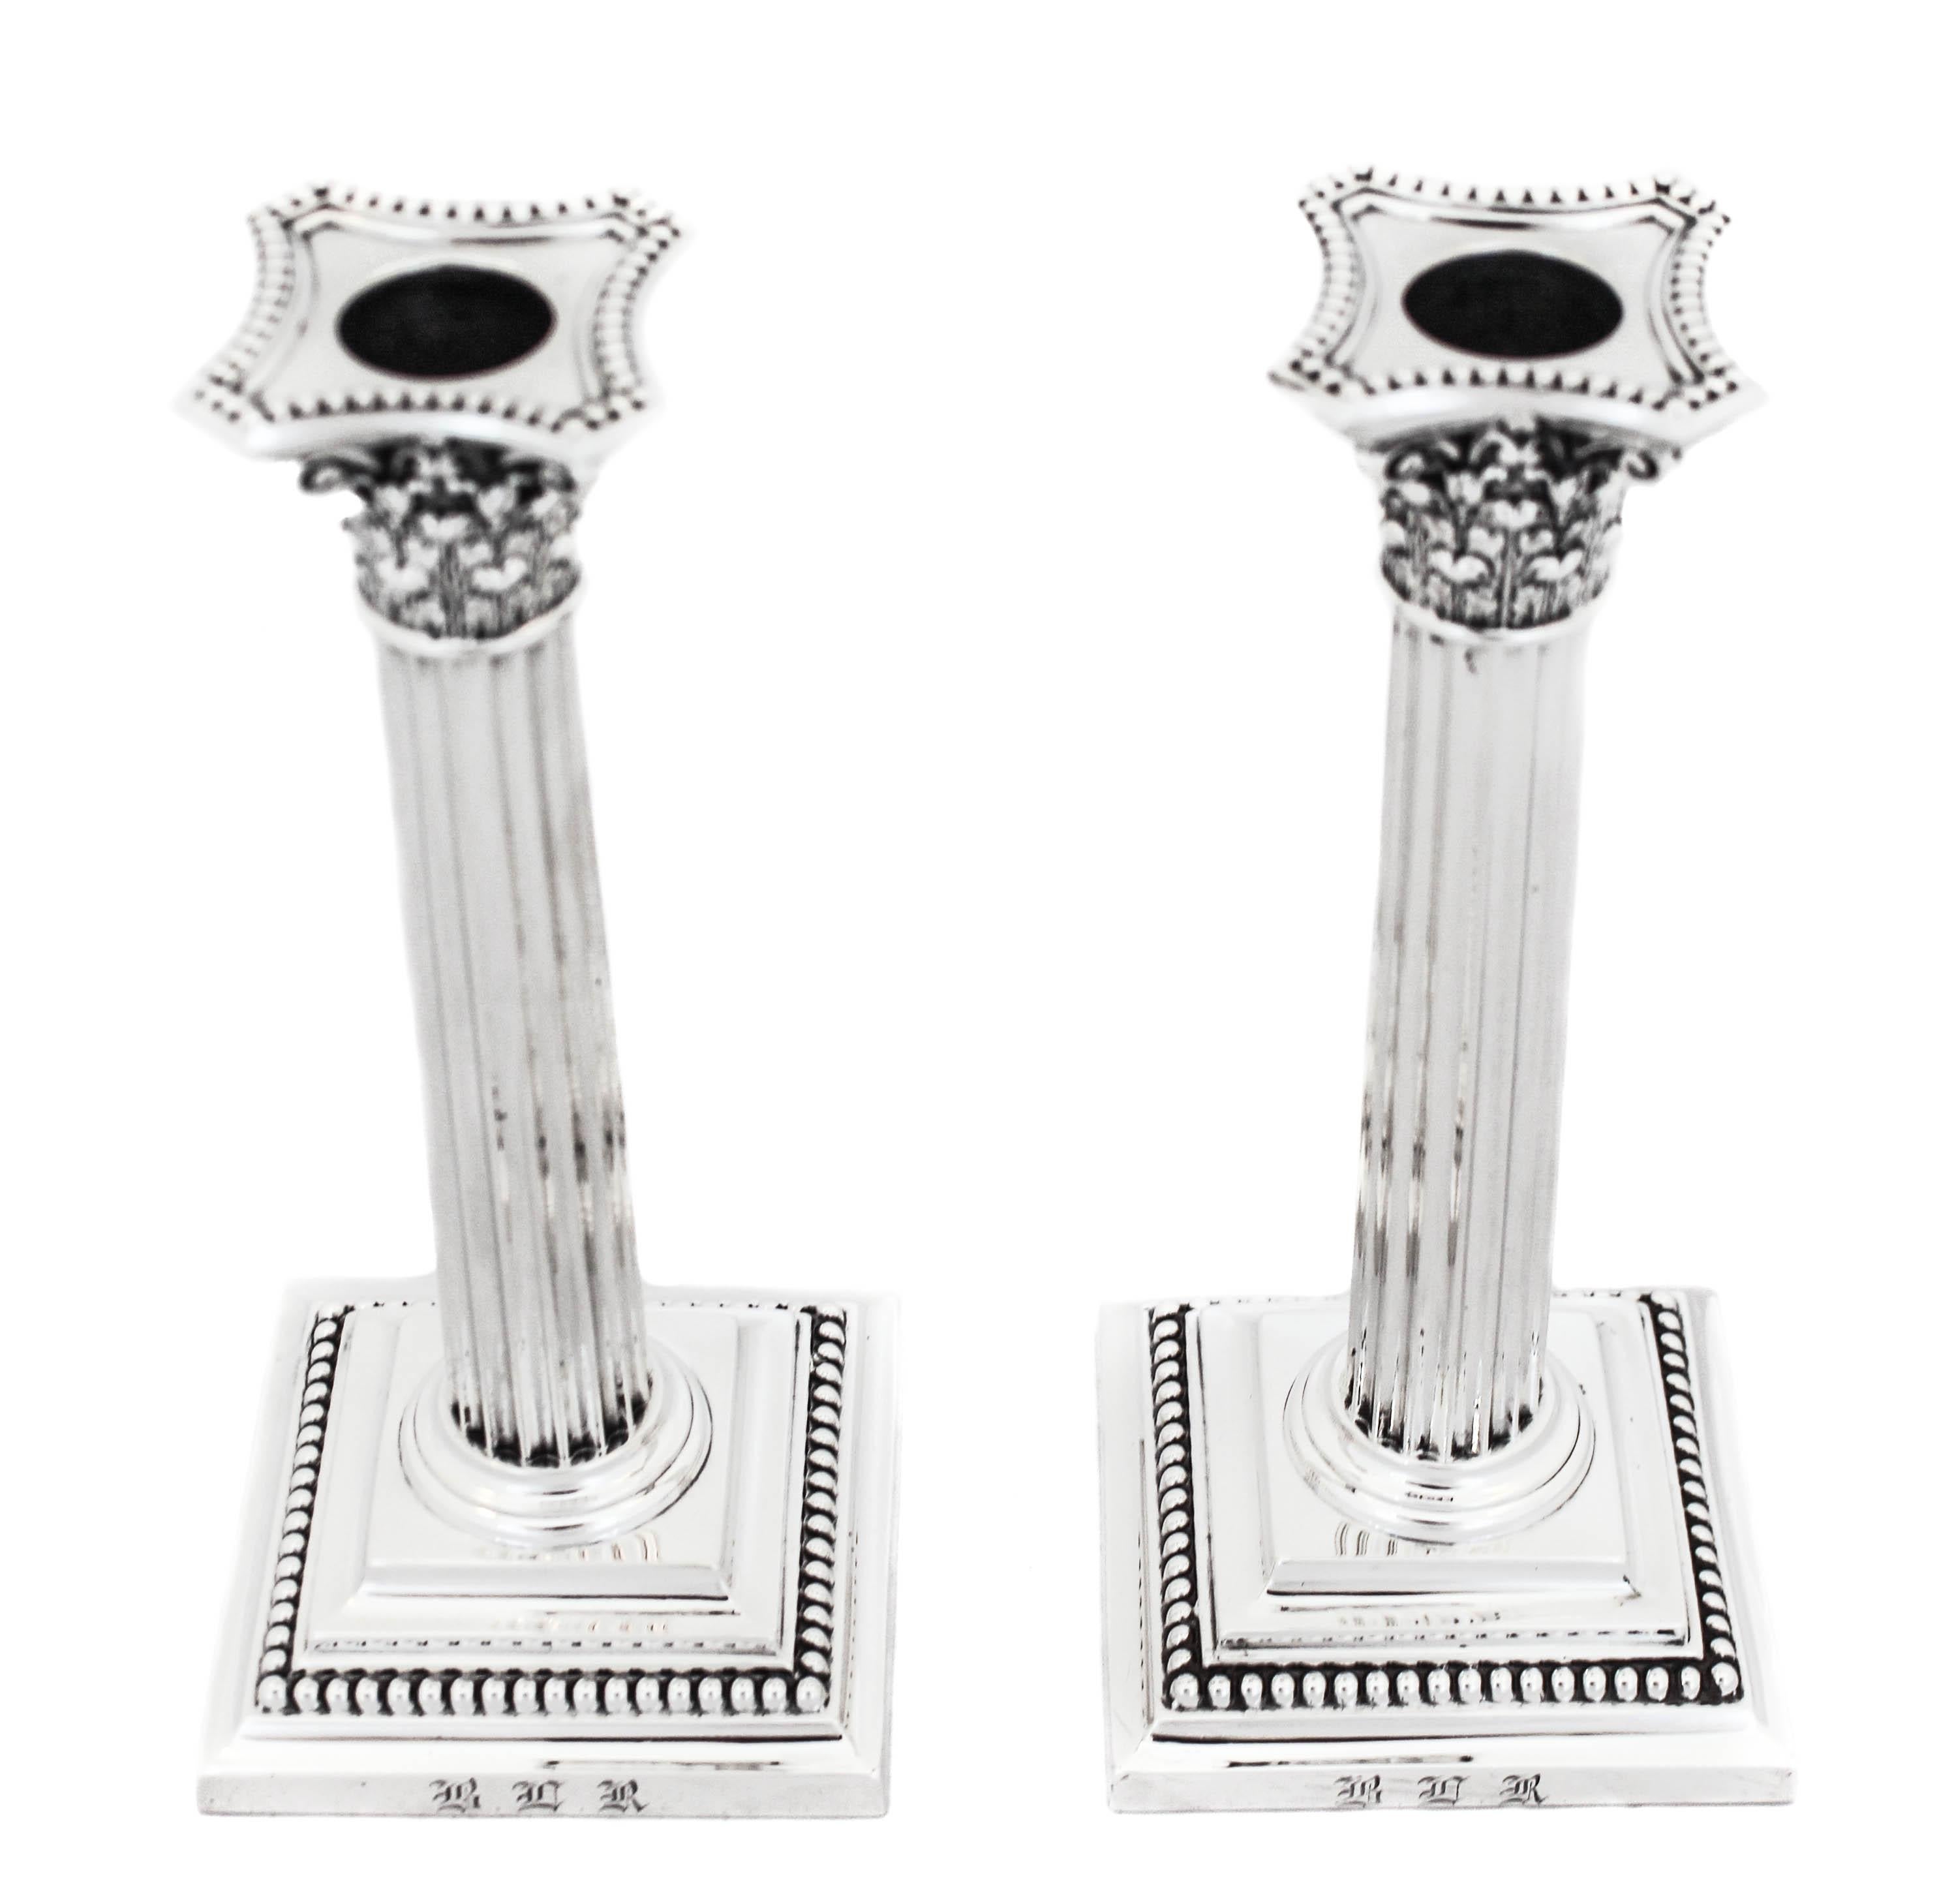 Being offered is a pair of candlesticks by Gorham Silversmiths, hallmarked 1923. They are designed as Corinthian Columns and have a square shaped base. Around the base a row of beads encircles the candlesticks. They have a real presence and will